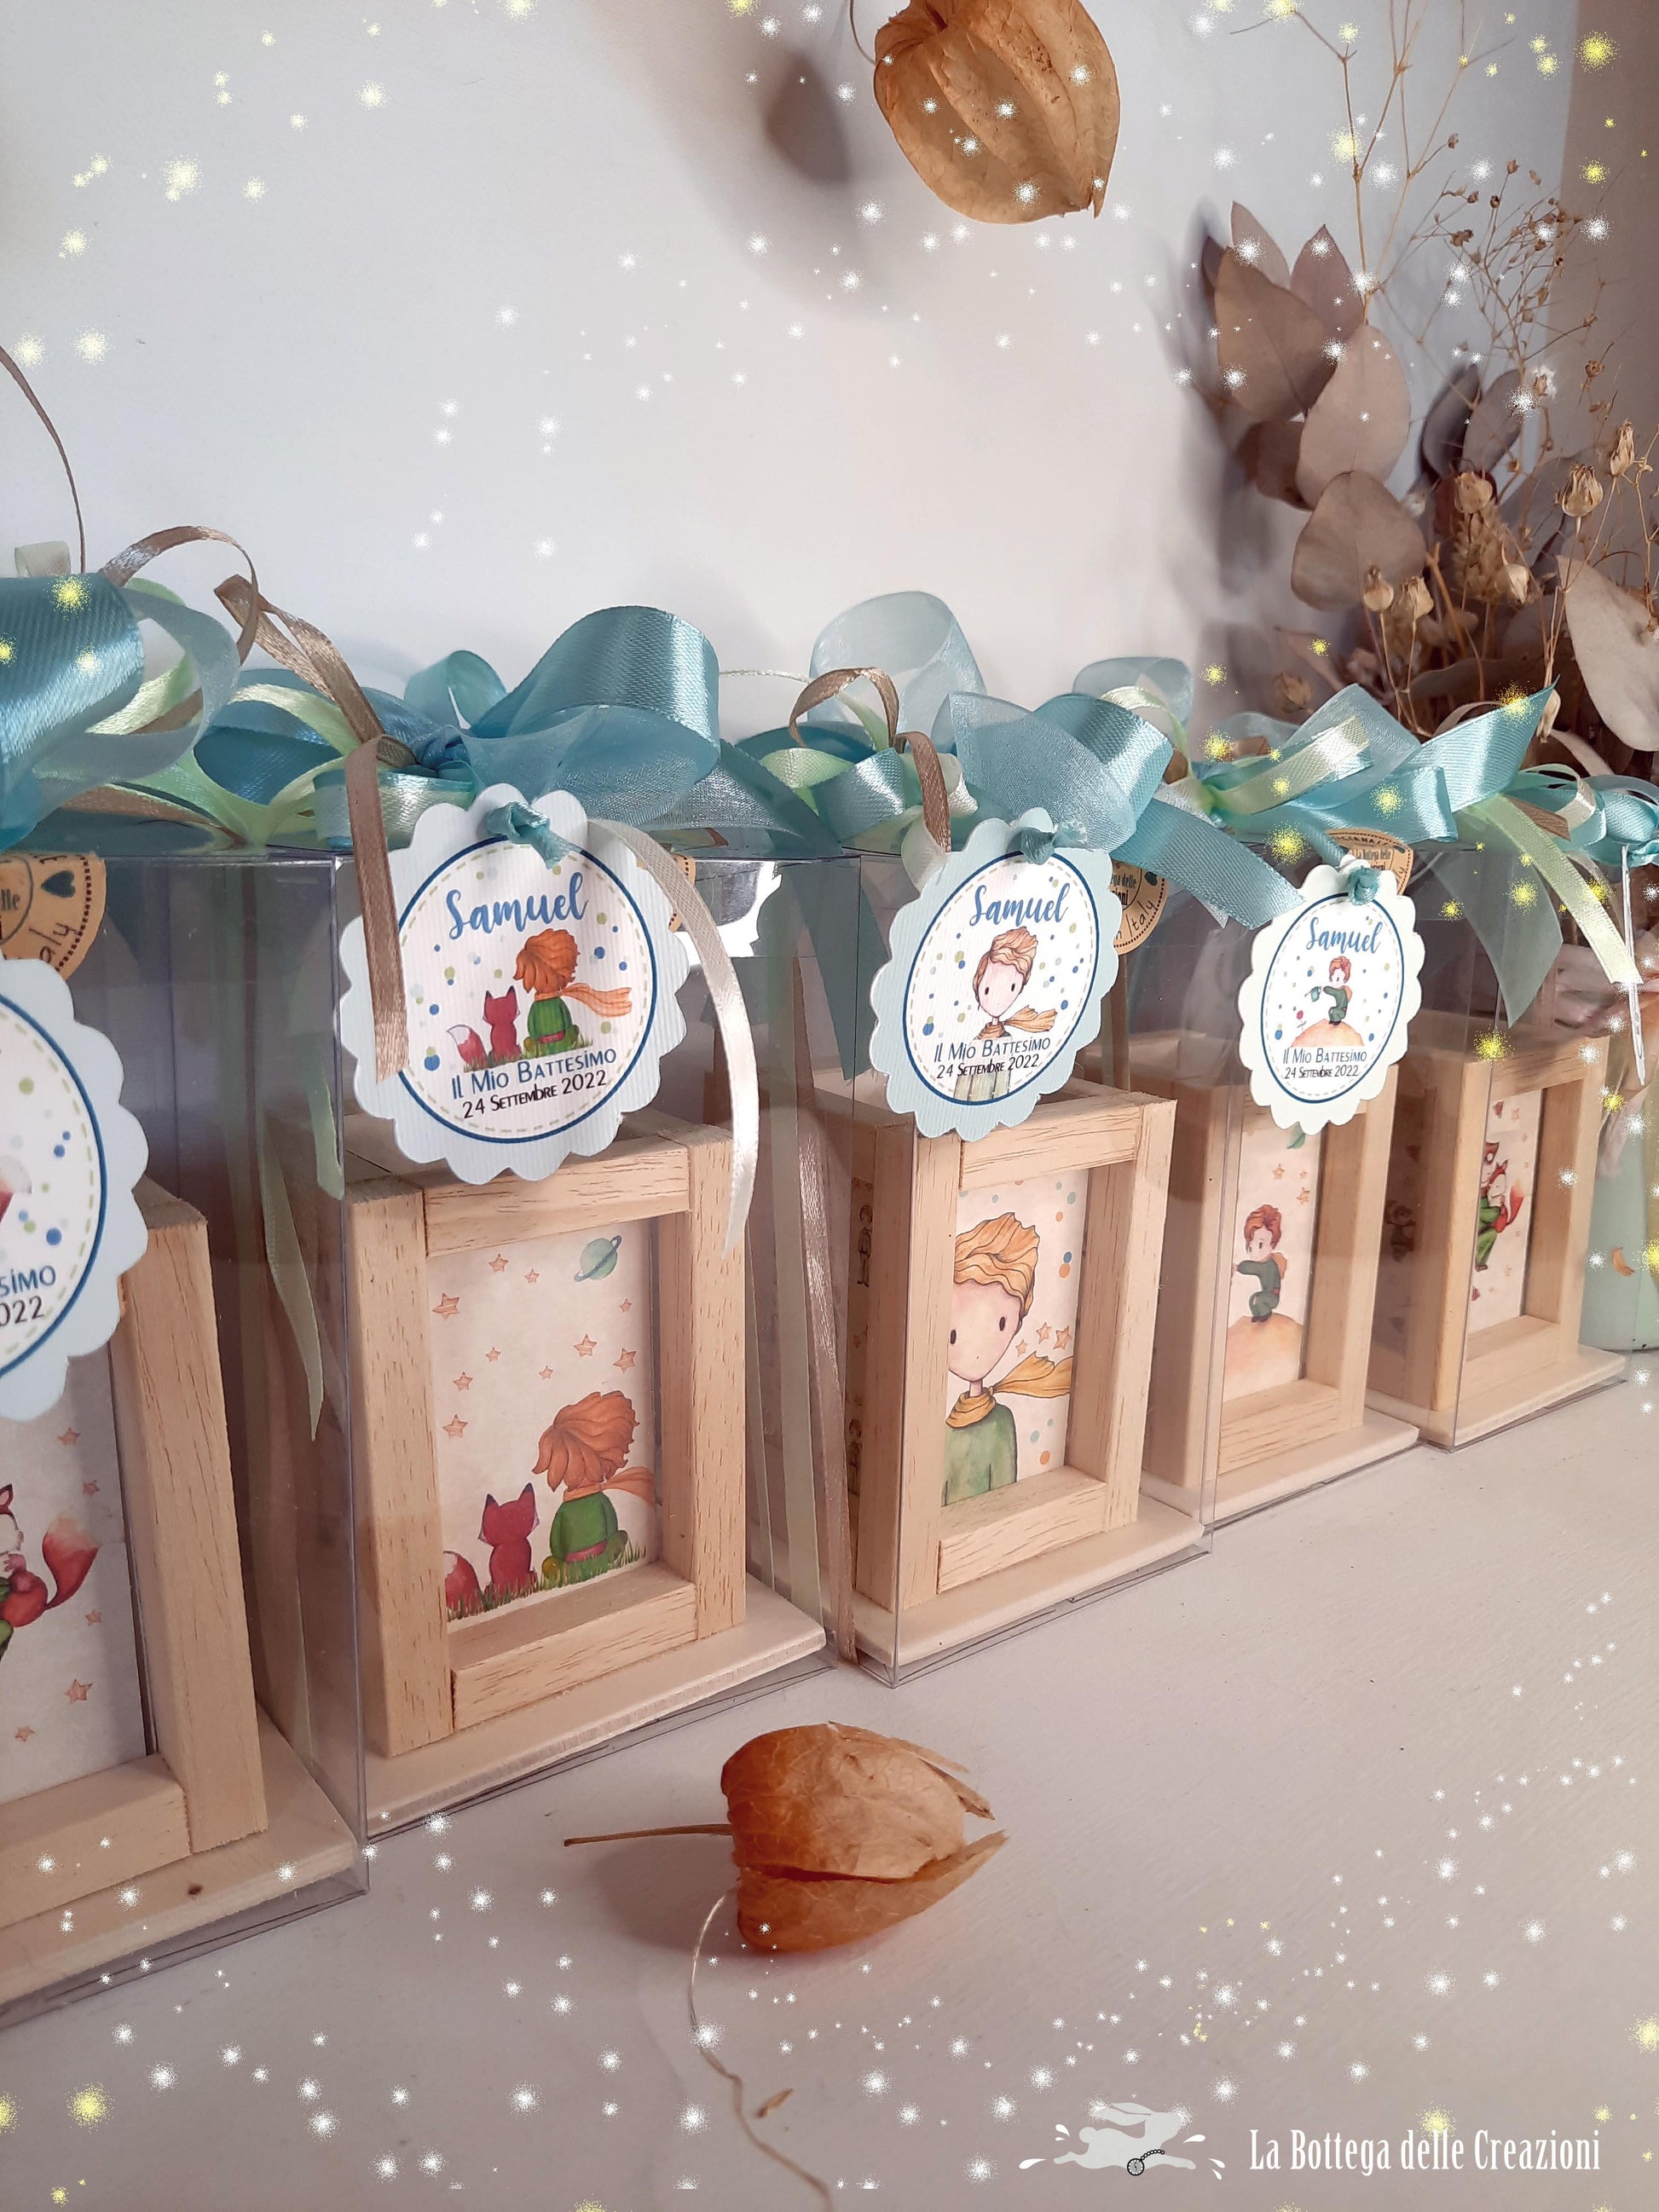 Little Prince Lanterns Gifts Favors